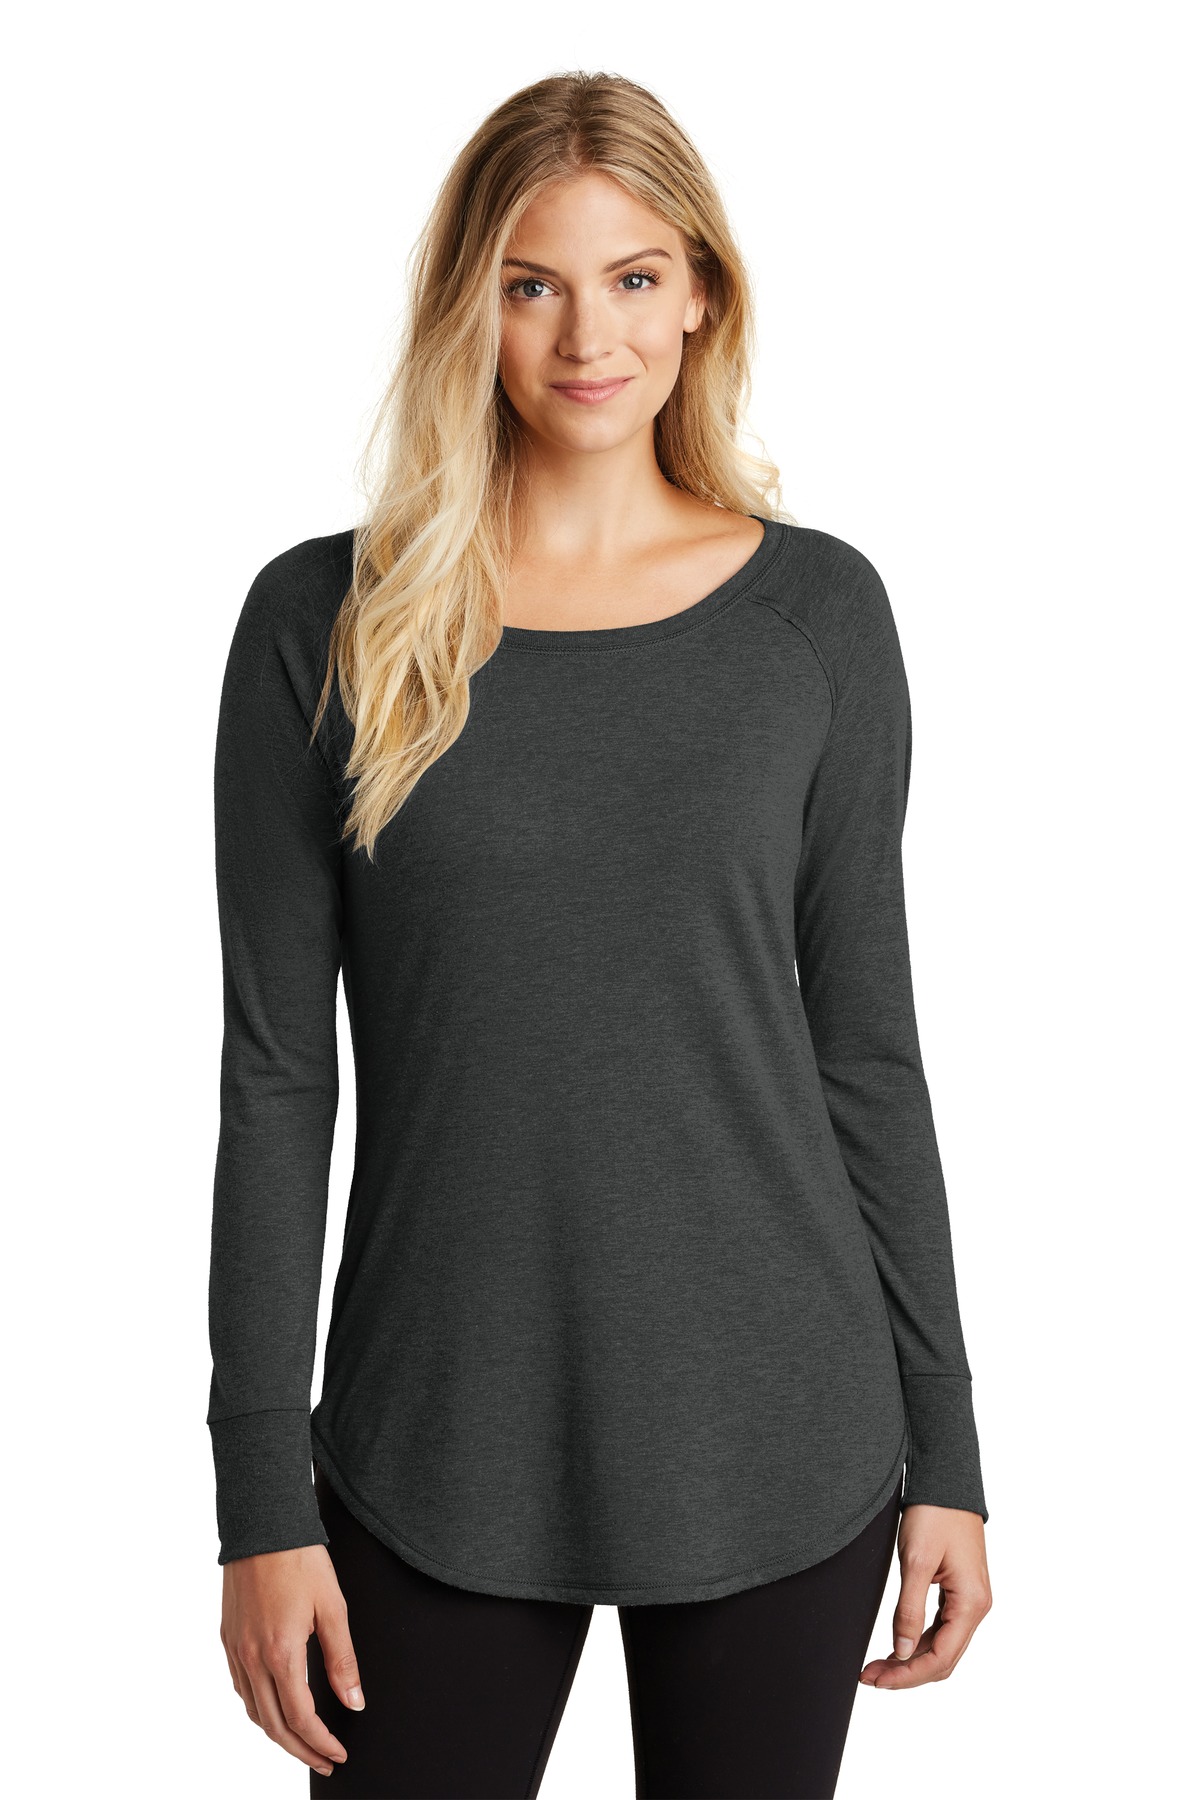 District DT132L | Women's Perfect Tri ® Long Sleeve Tunic Tee | ShirtSpace